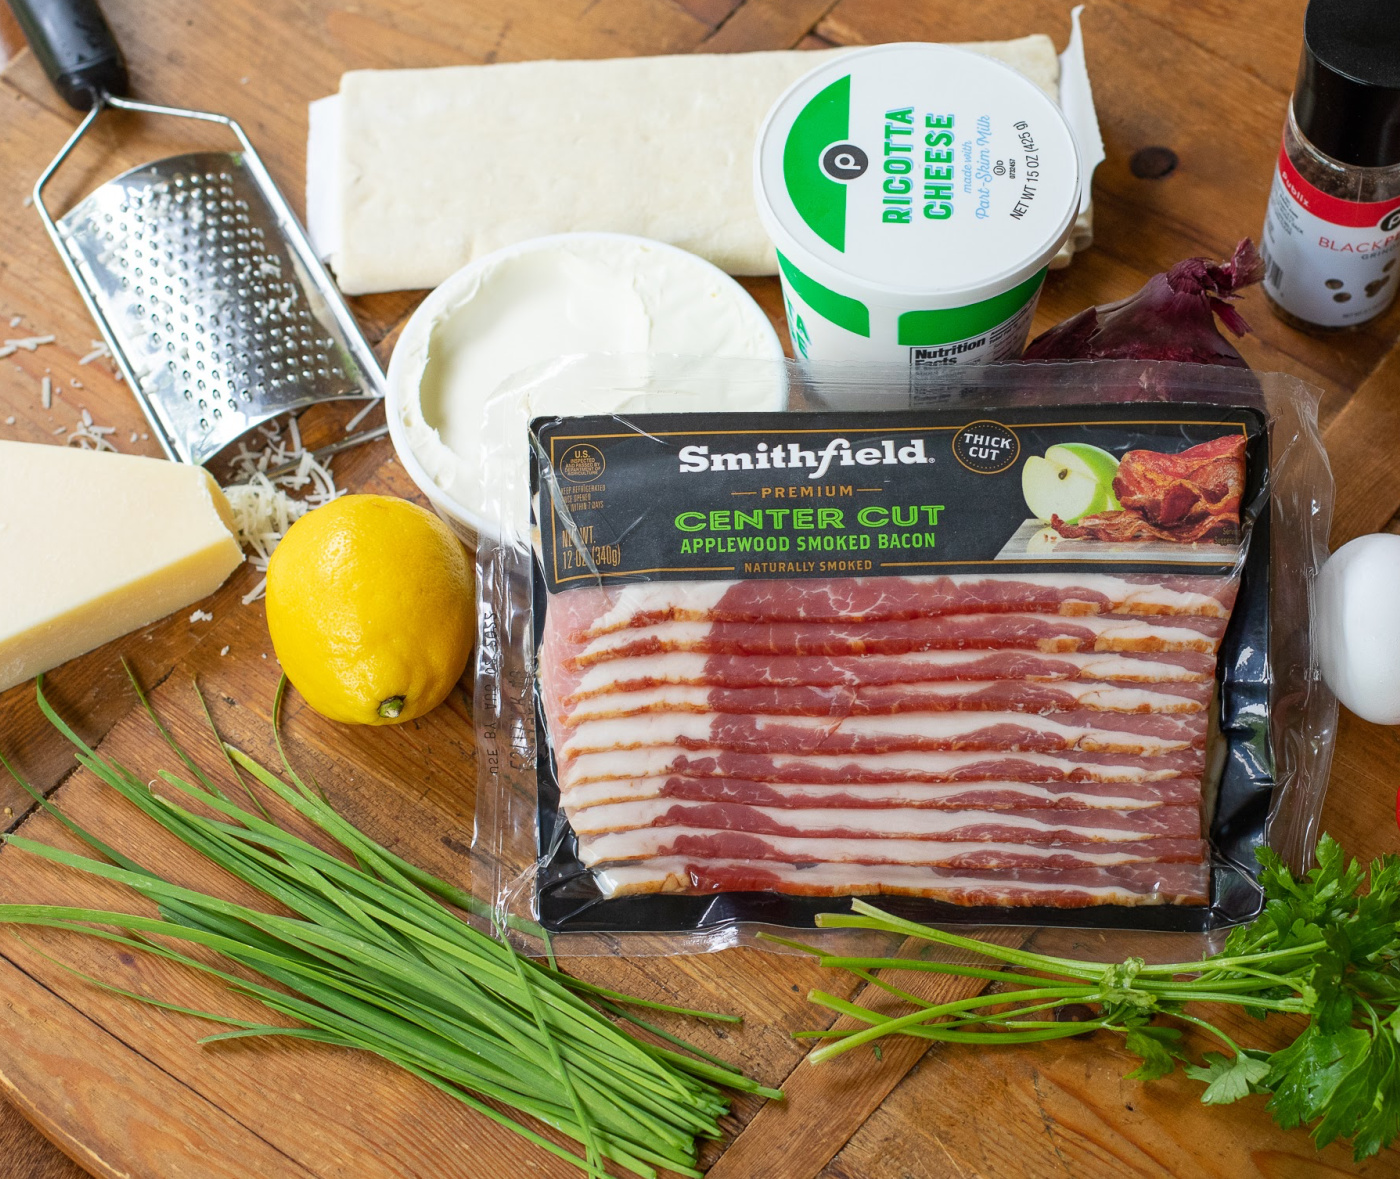 New Smithfield Bacon Flavors To Enjoy - Get Them At A GREAT Price At Publix This Week on I Heart Publix 1